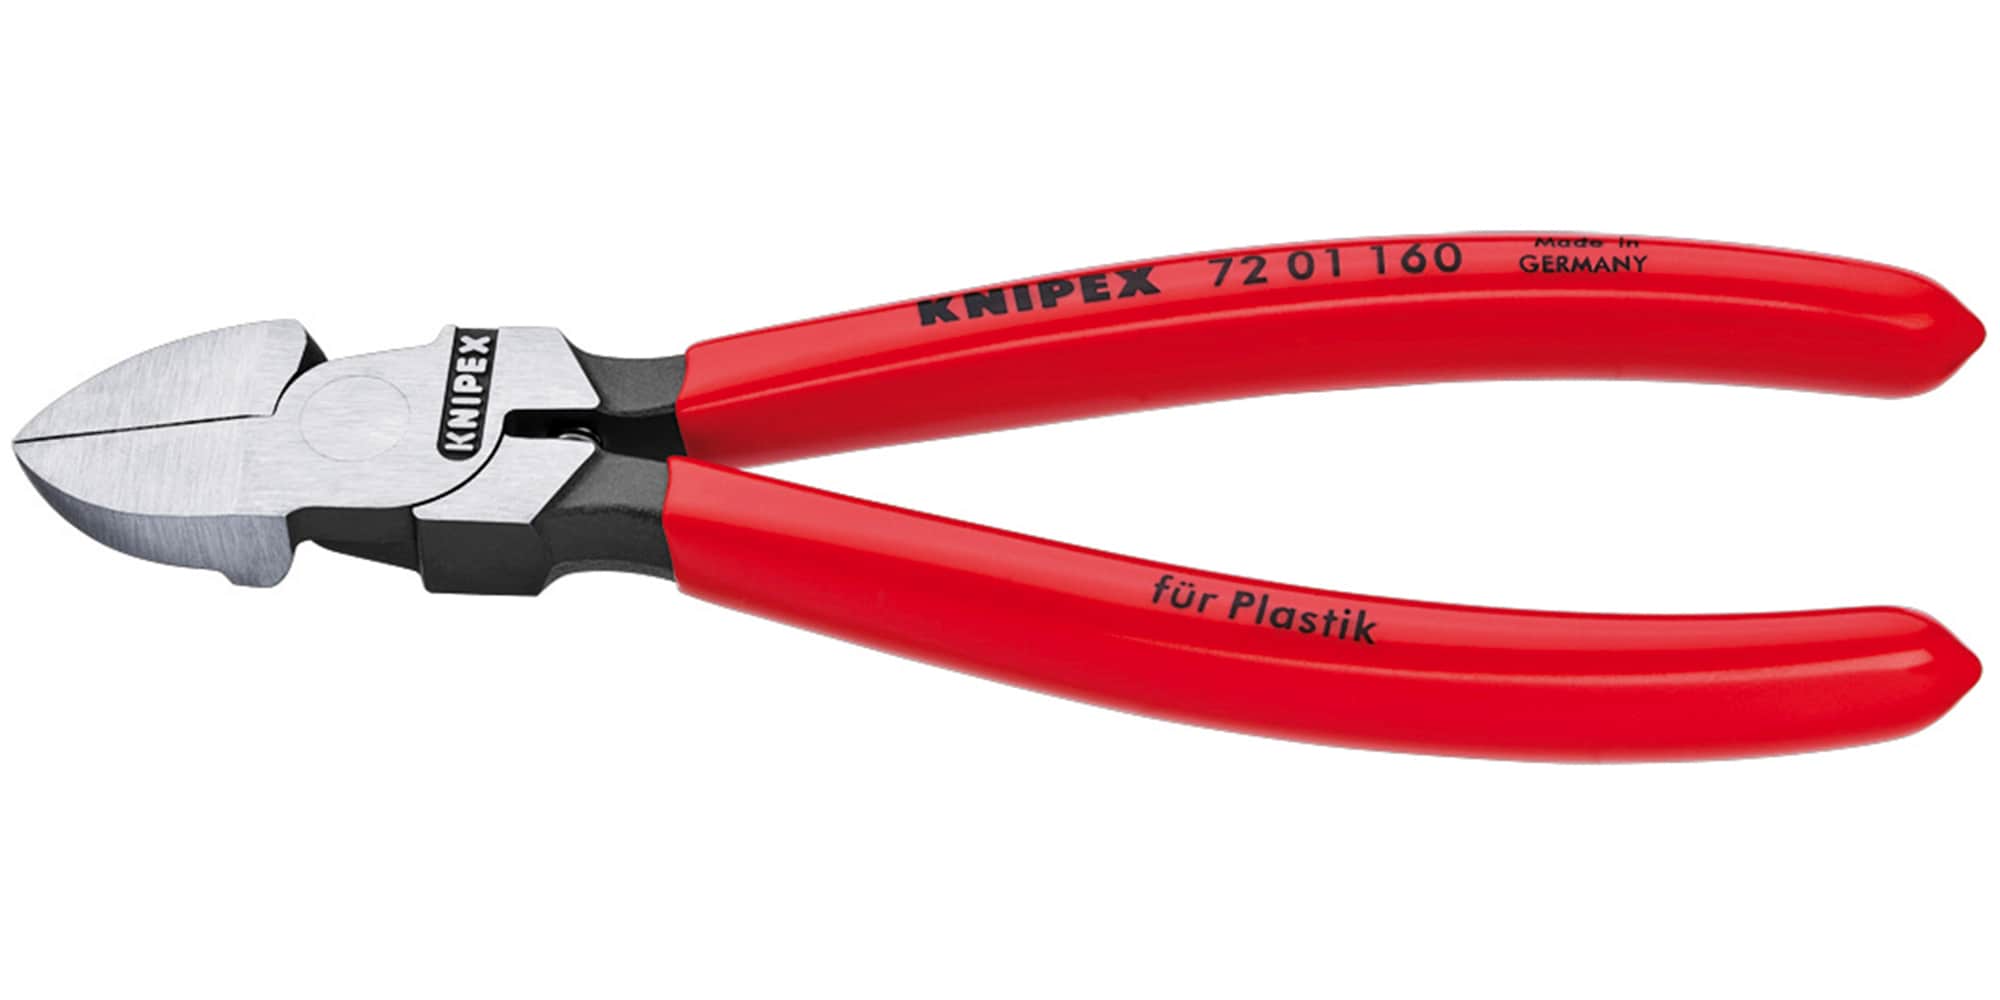 Wire Cutter, Side Cutters, Wire Cutters For Crafting, Flush Cutter